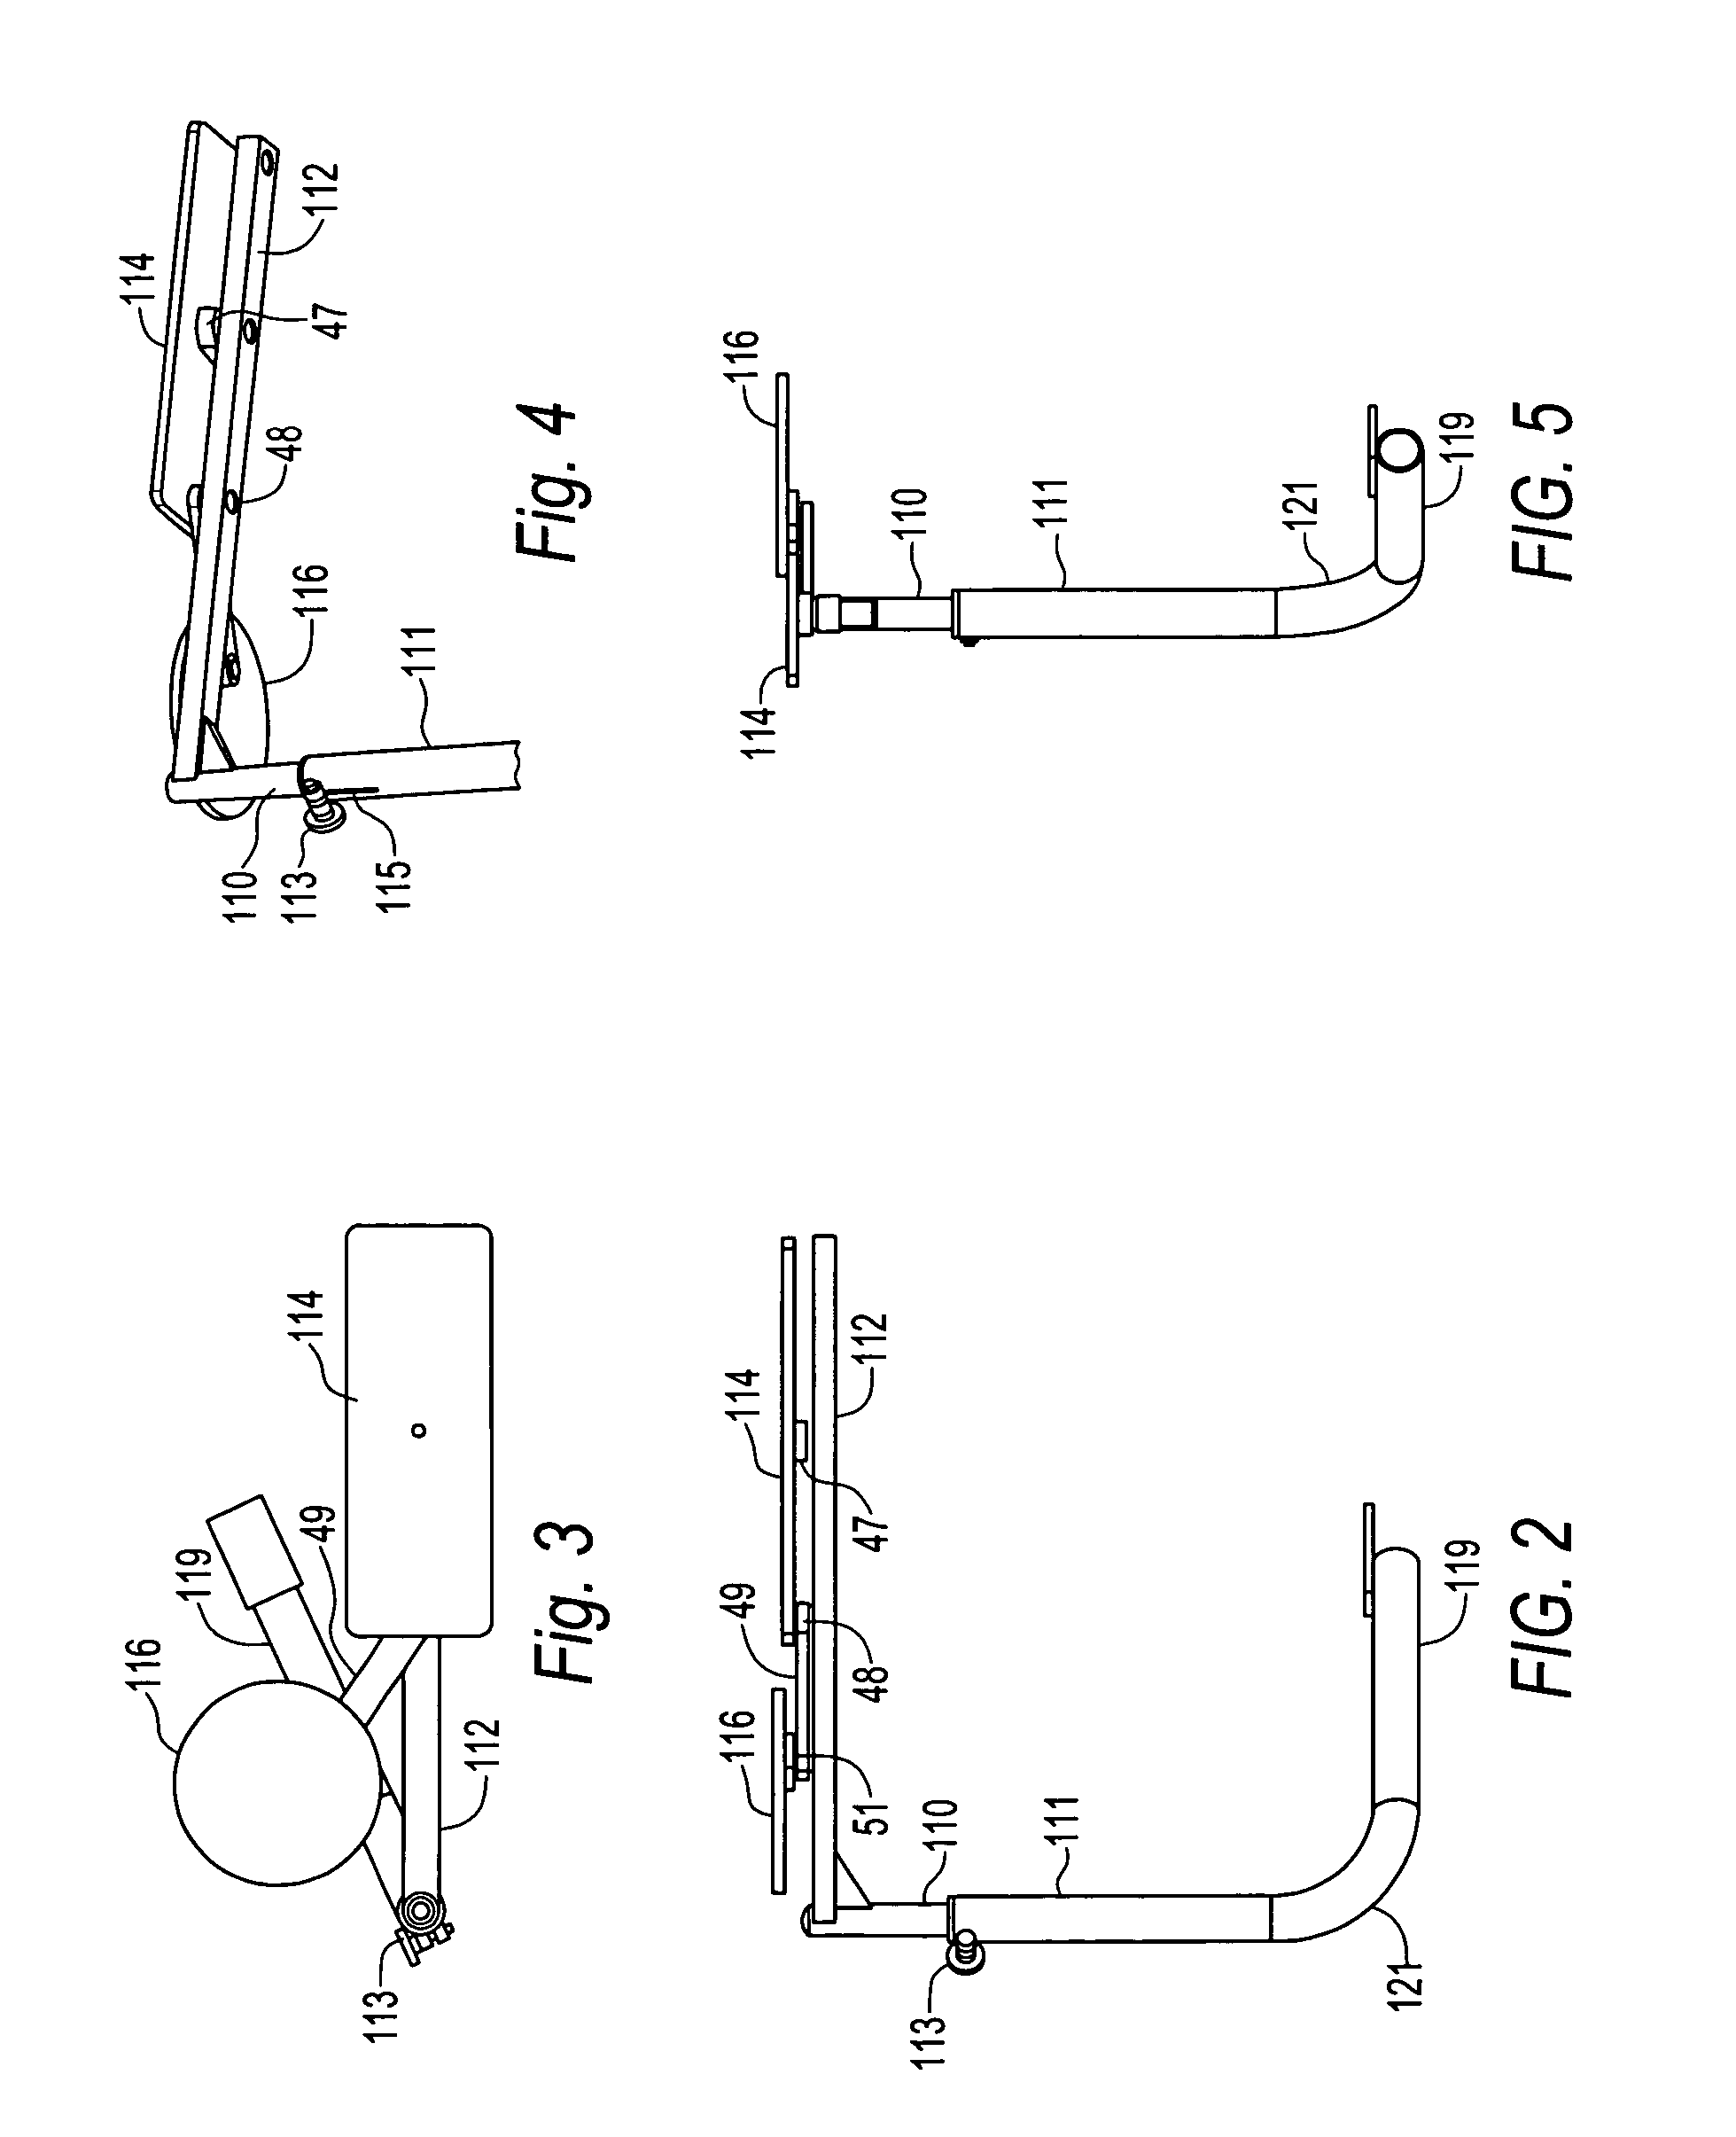 Peripheral support apparatus and method